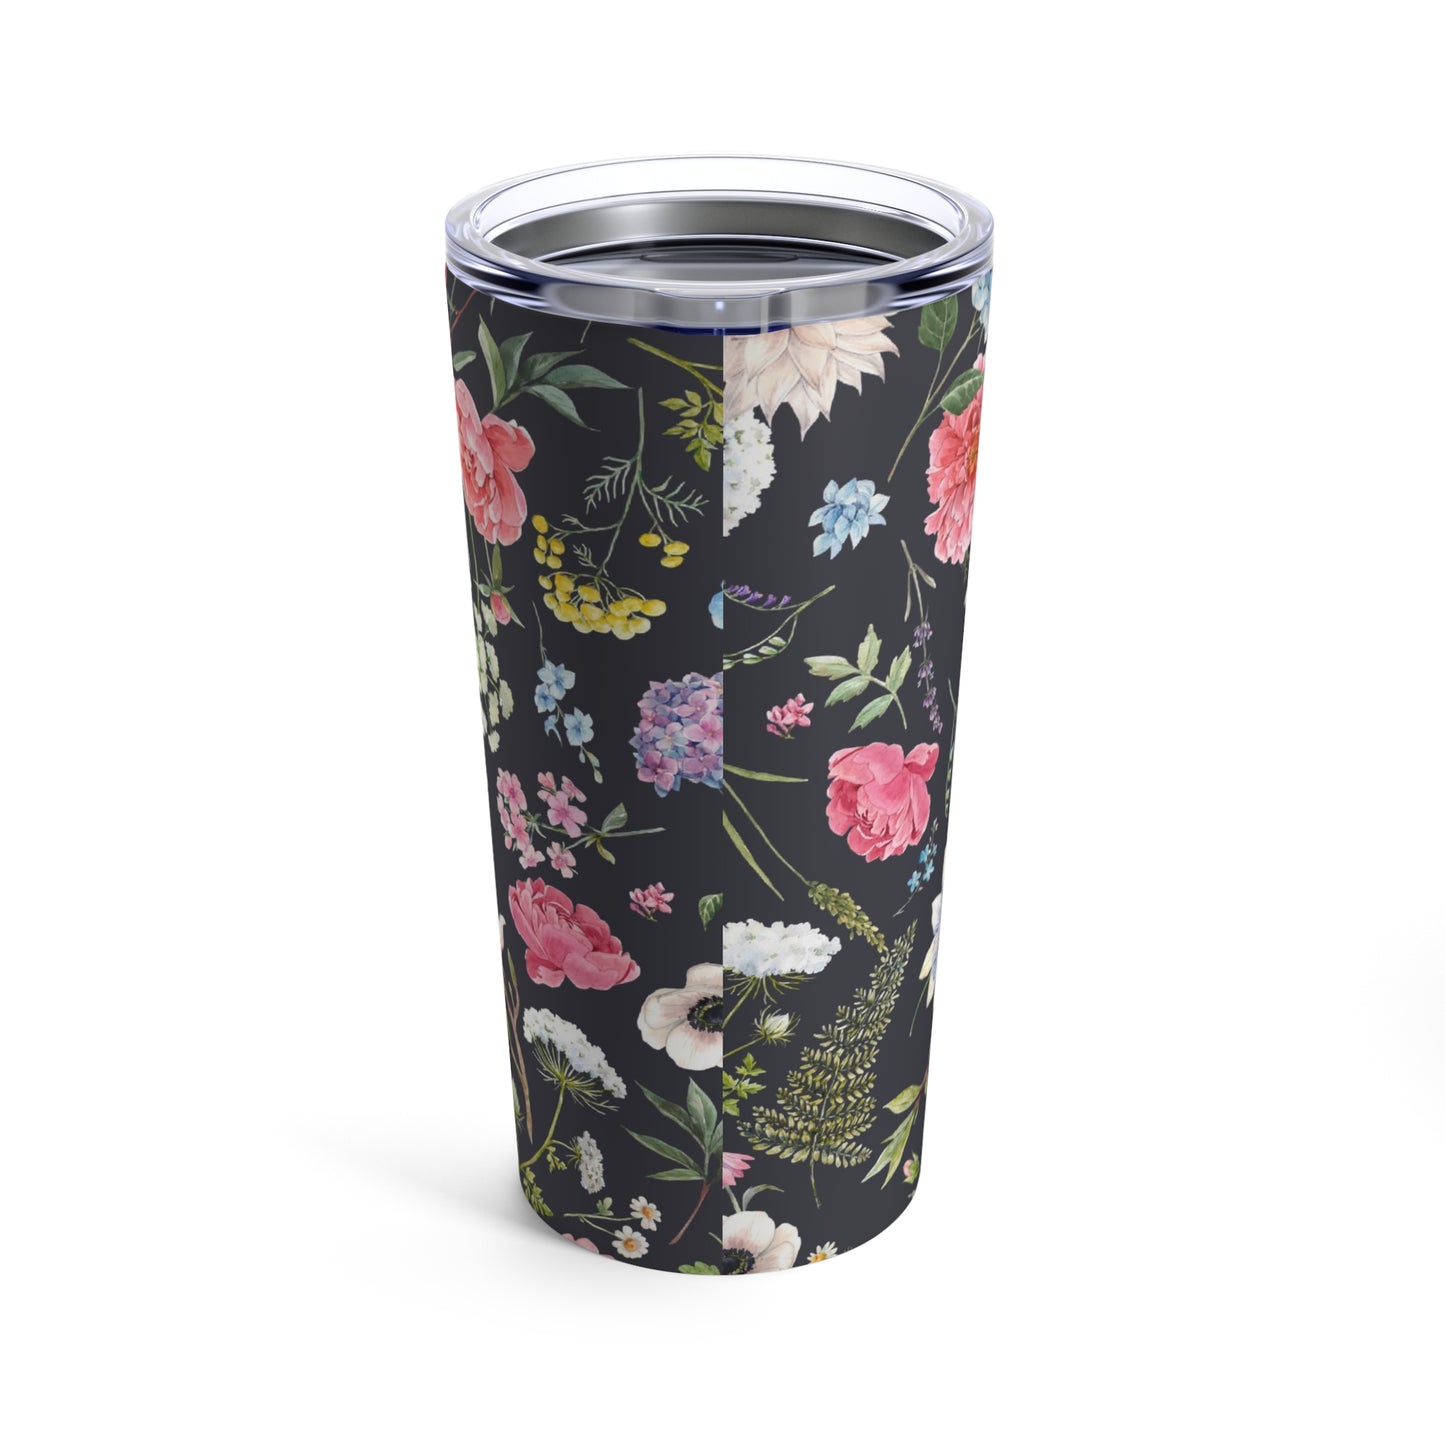 A Printify Flower Garden Tumbler: 20 oz., Stainless steel; Insulated